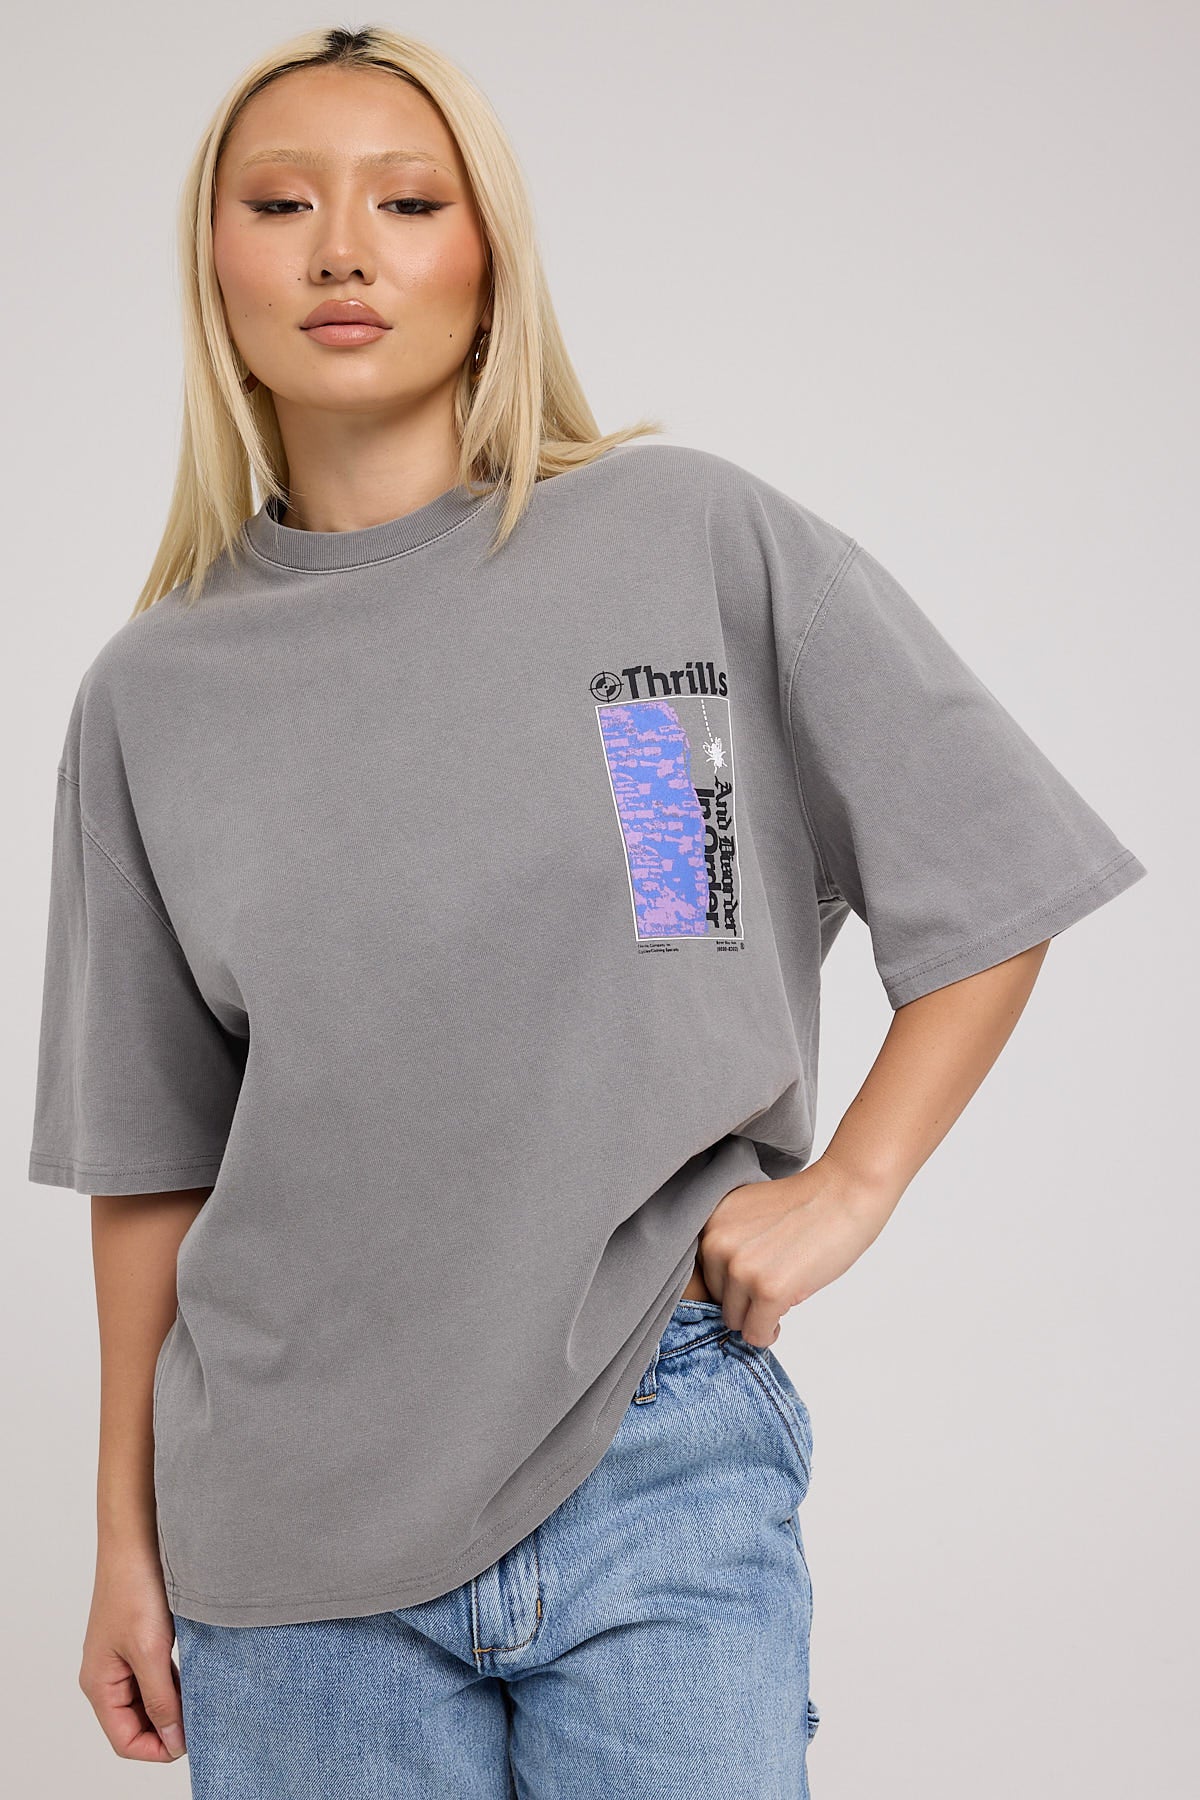 Thrills In Order Oversized Tee Washed Grey